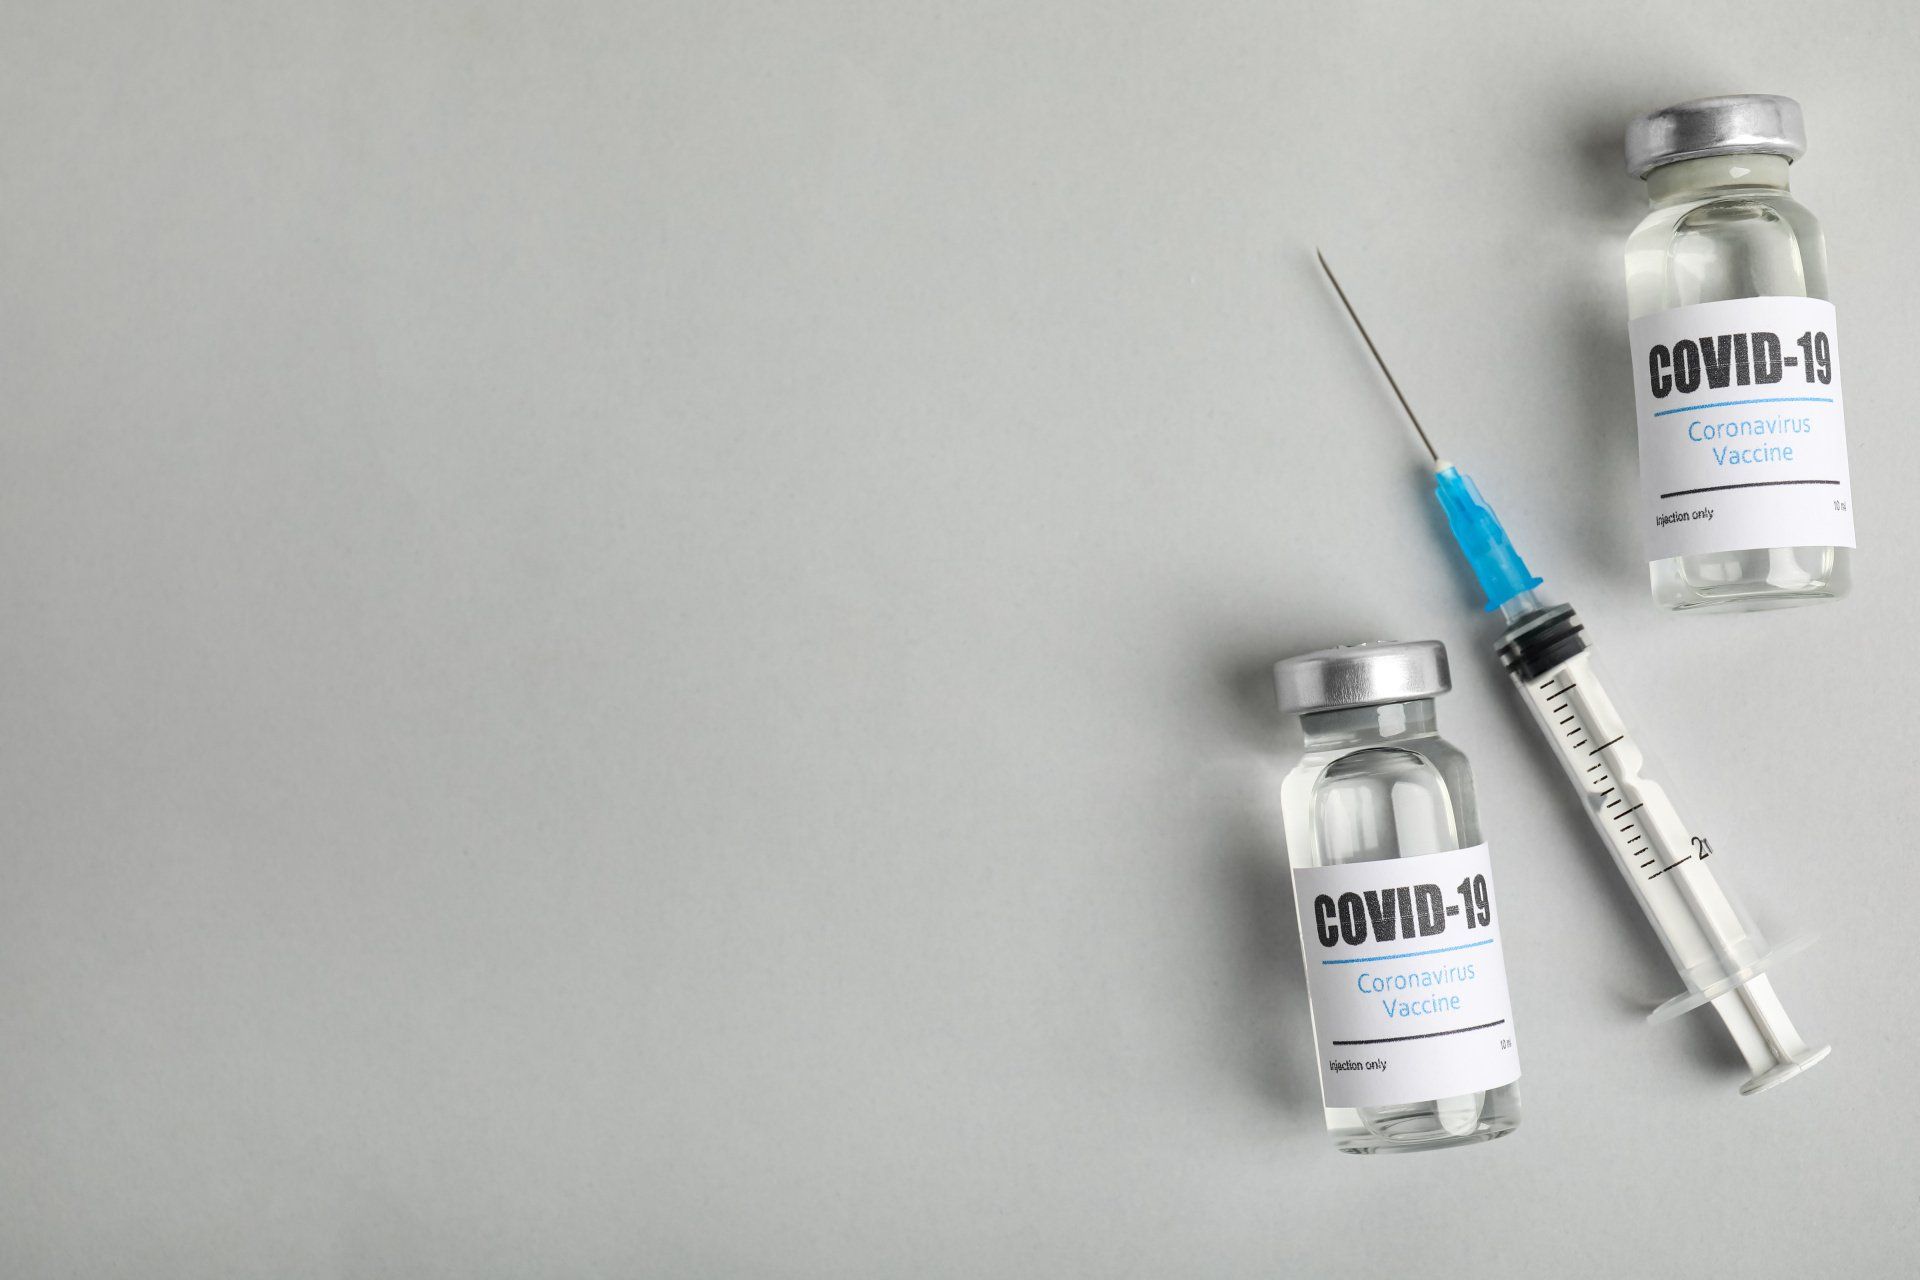 Can You File a Claim for COVID-19 Vaccination Mandates at Work?